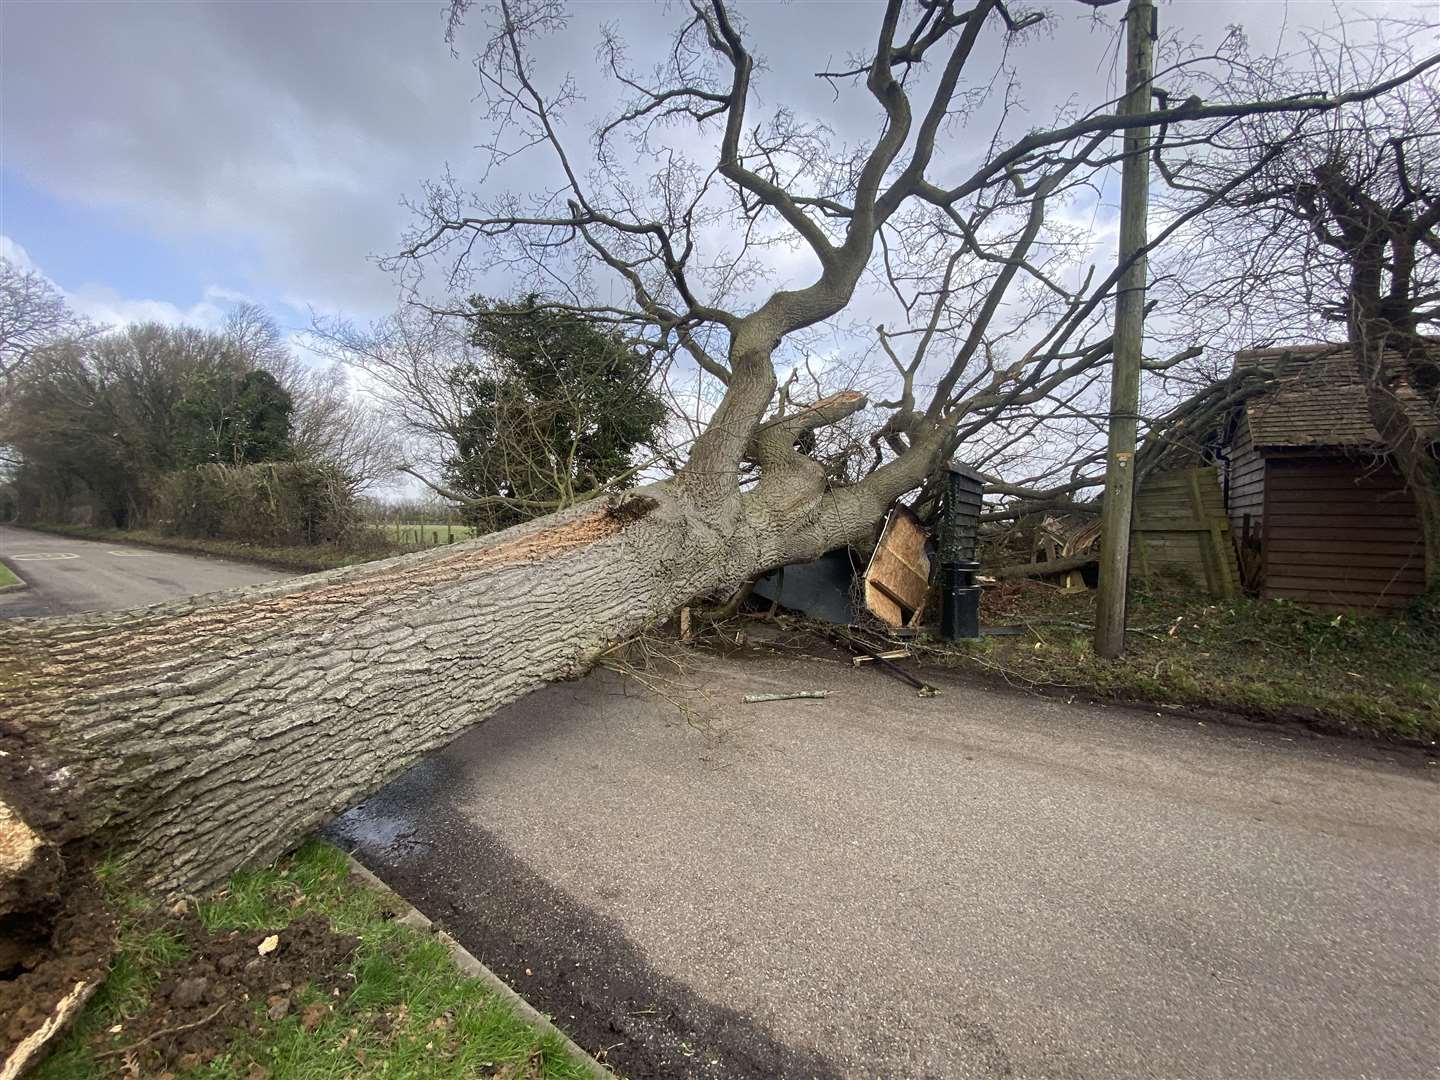 It was lucky no one was waiting at this bus stop in Pluckley... Picture: Ryland Holloway